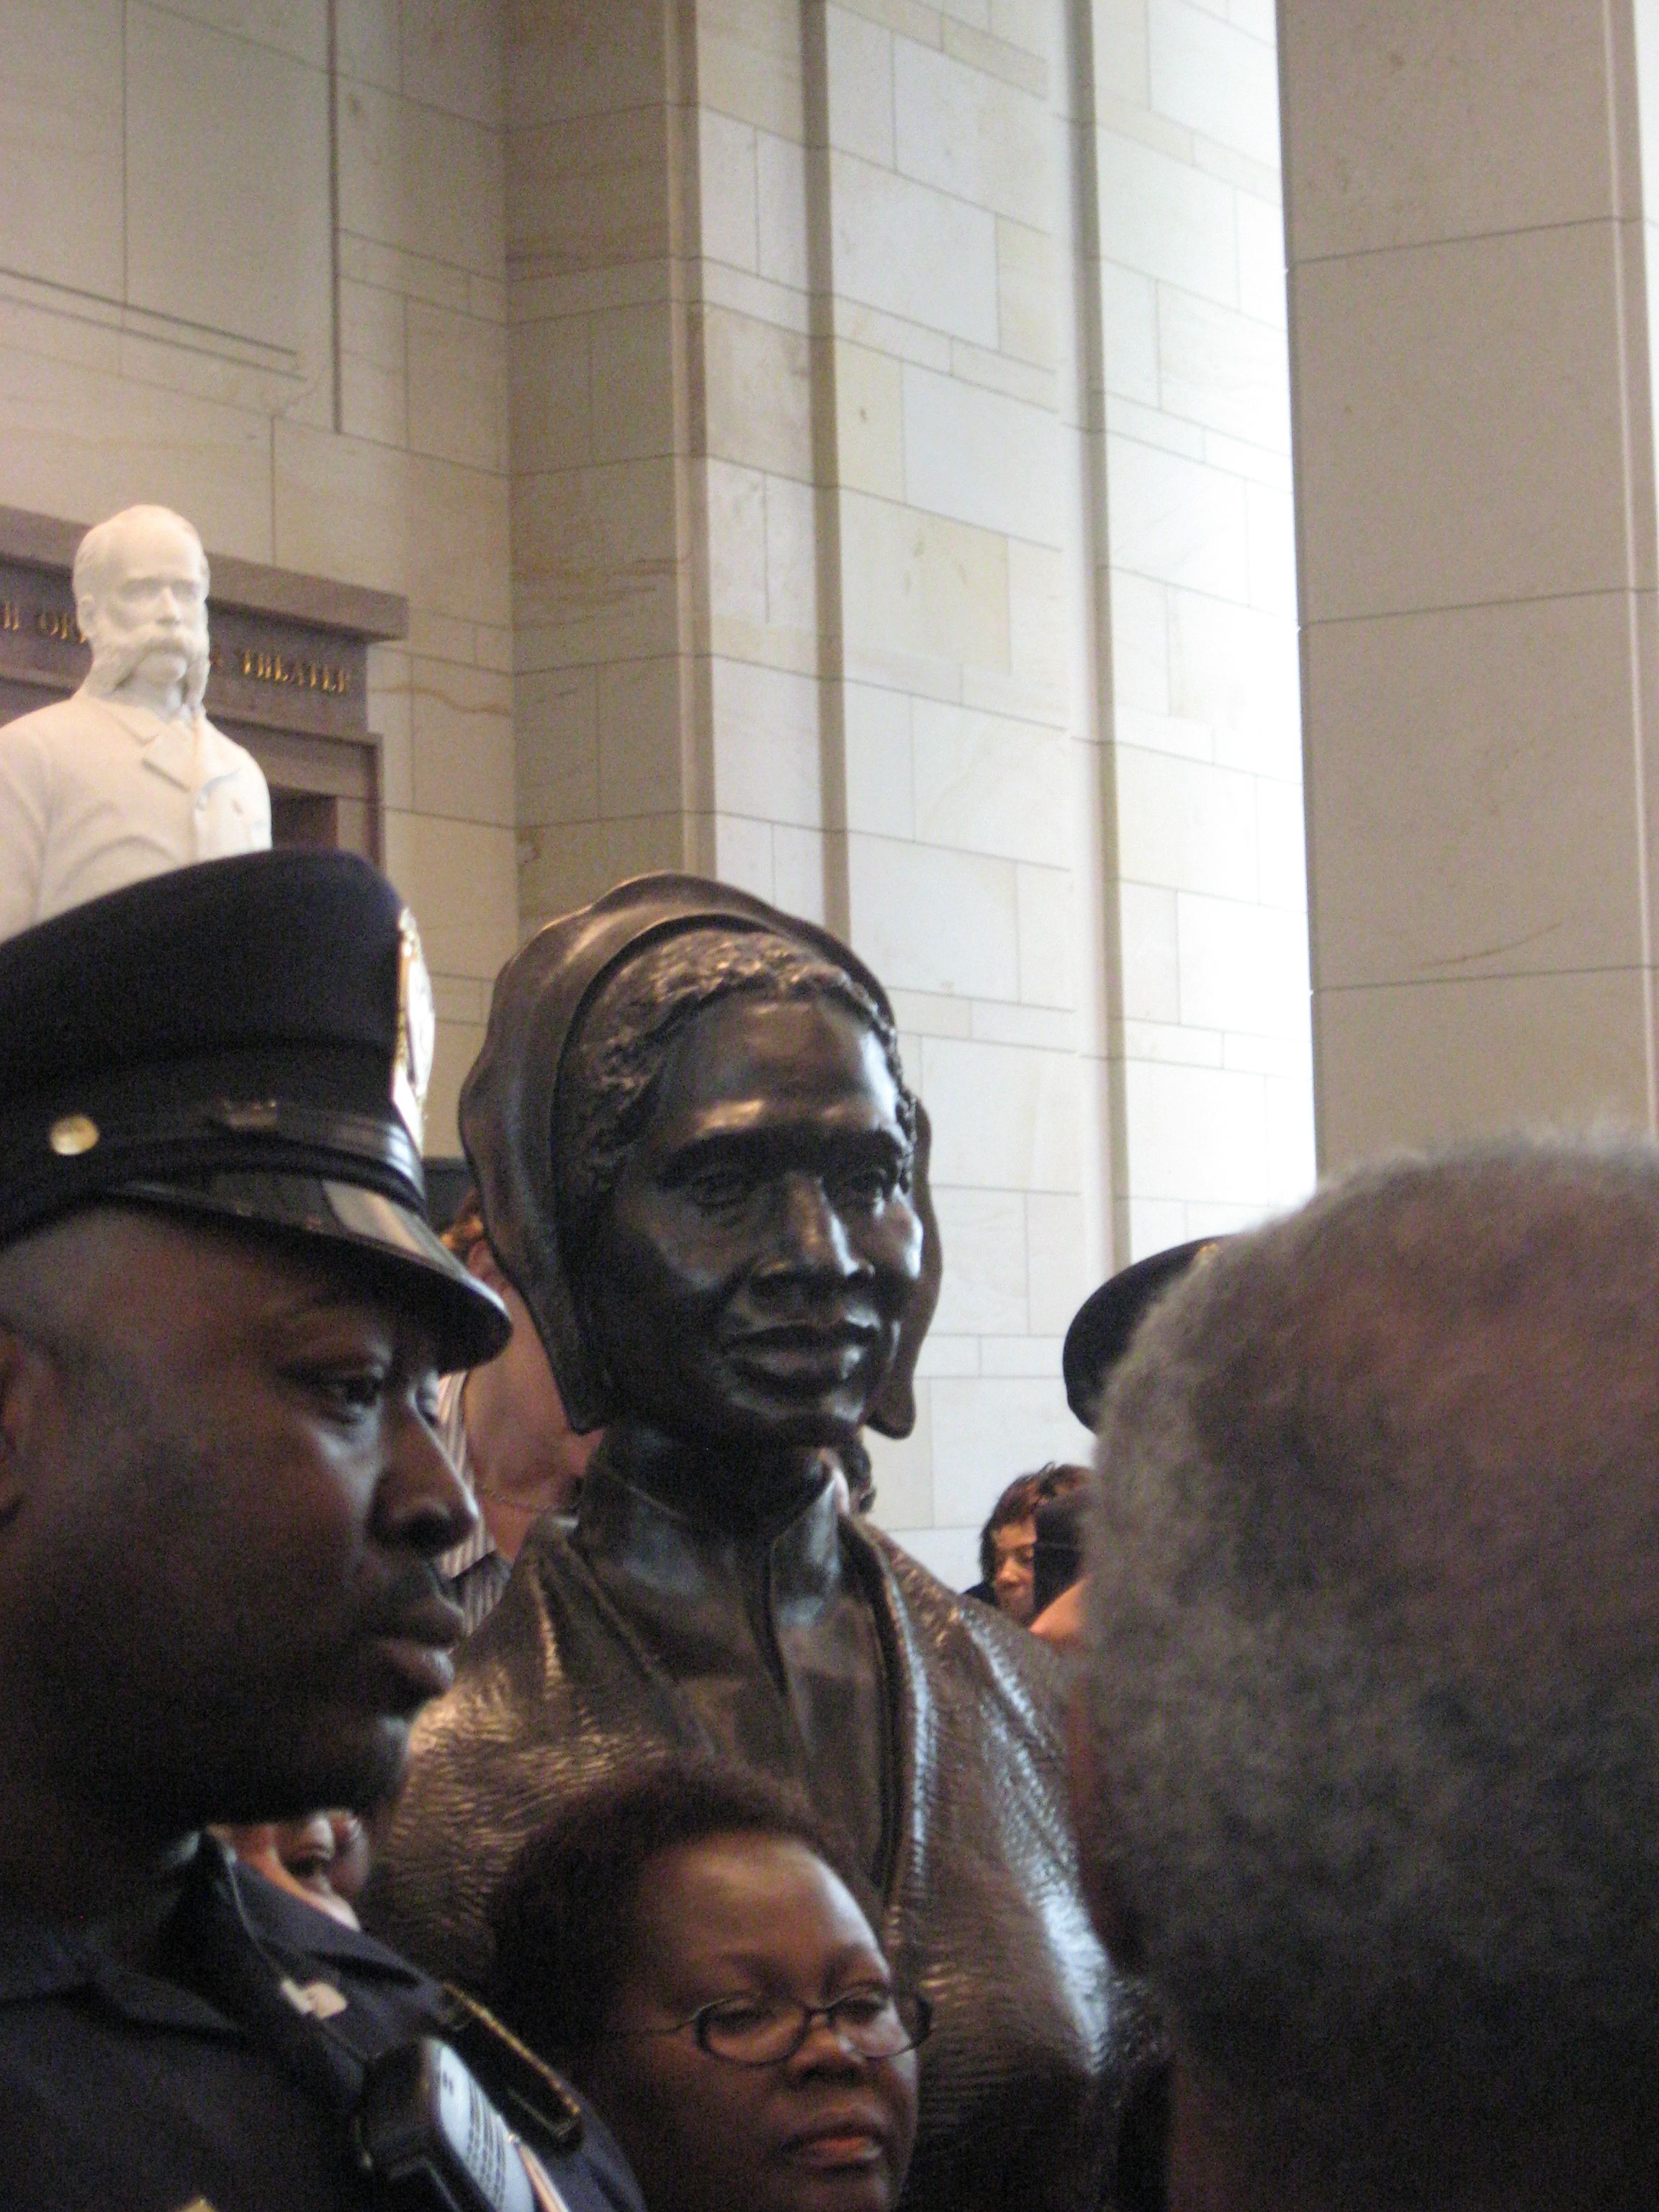 On April 28, 2009, Michelle Obama unveiled a bust of Sojourner Truth in